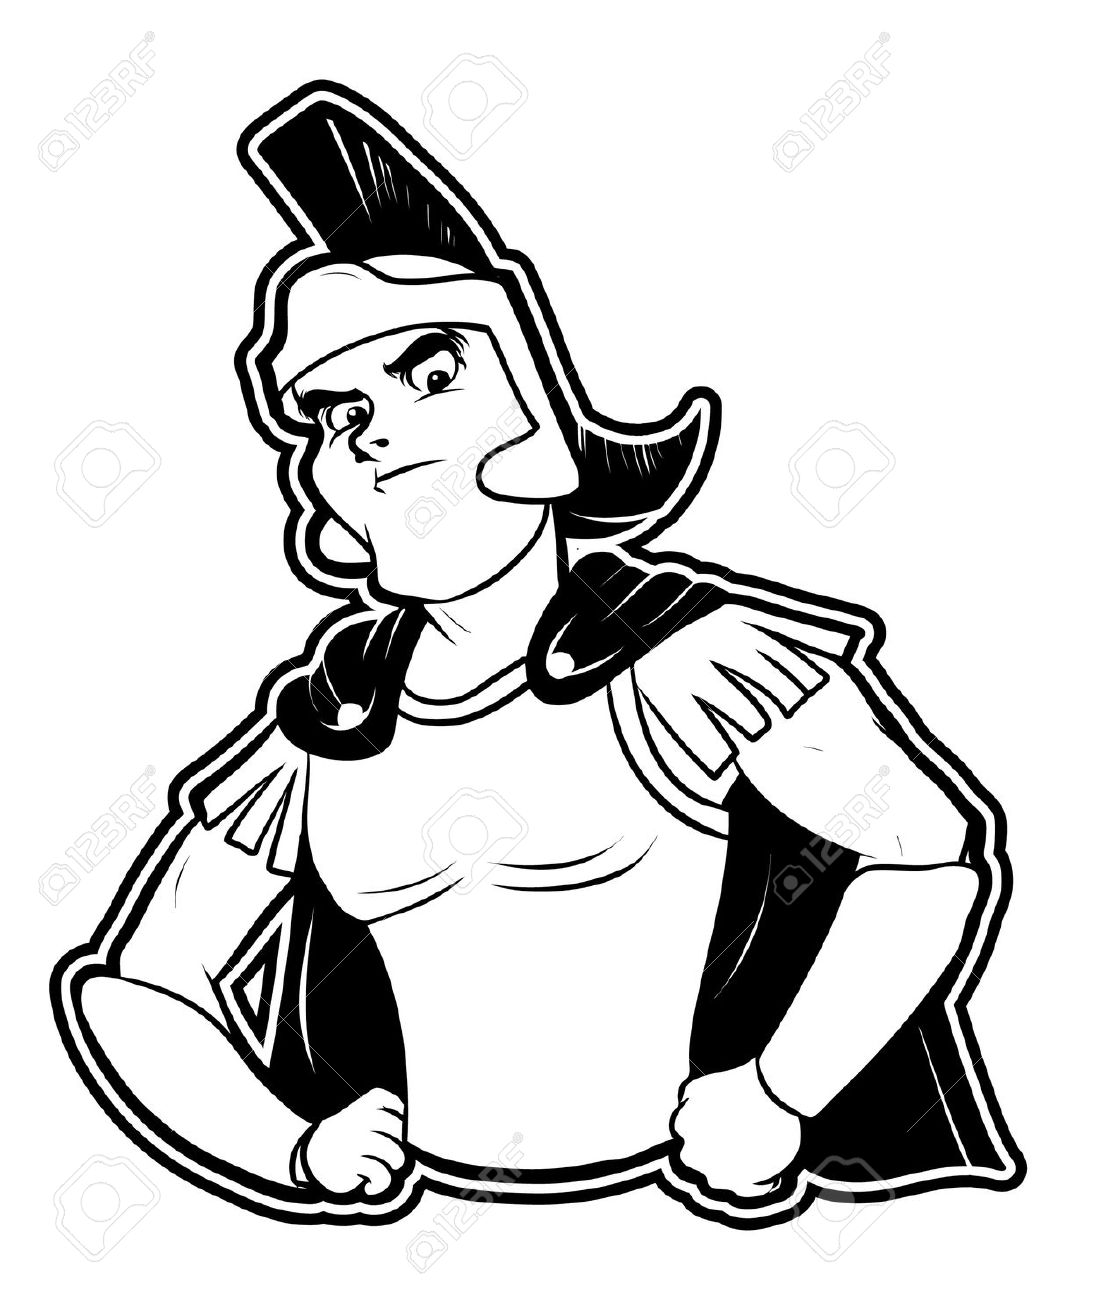 Warrior clipart bravery.  collection of brave